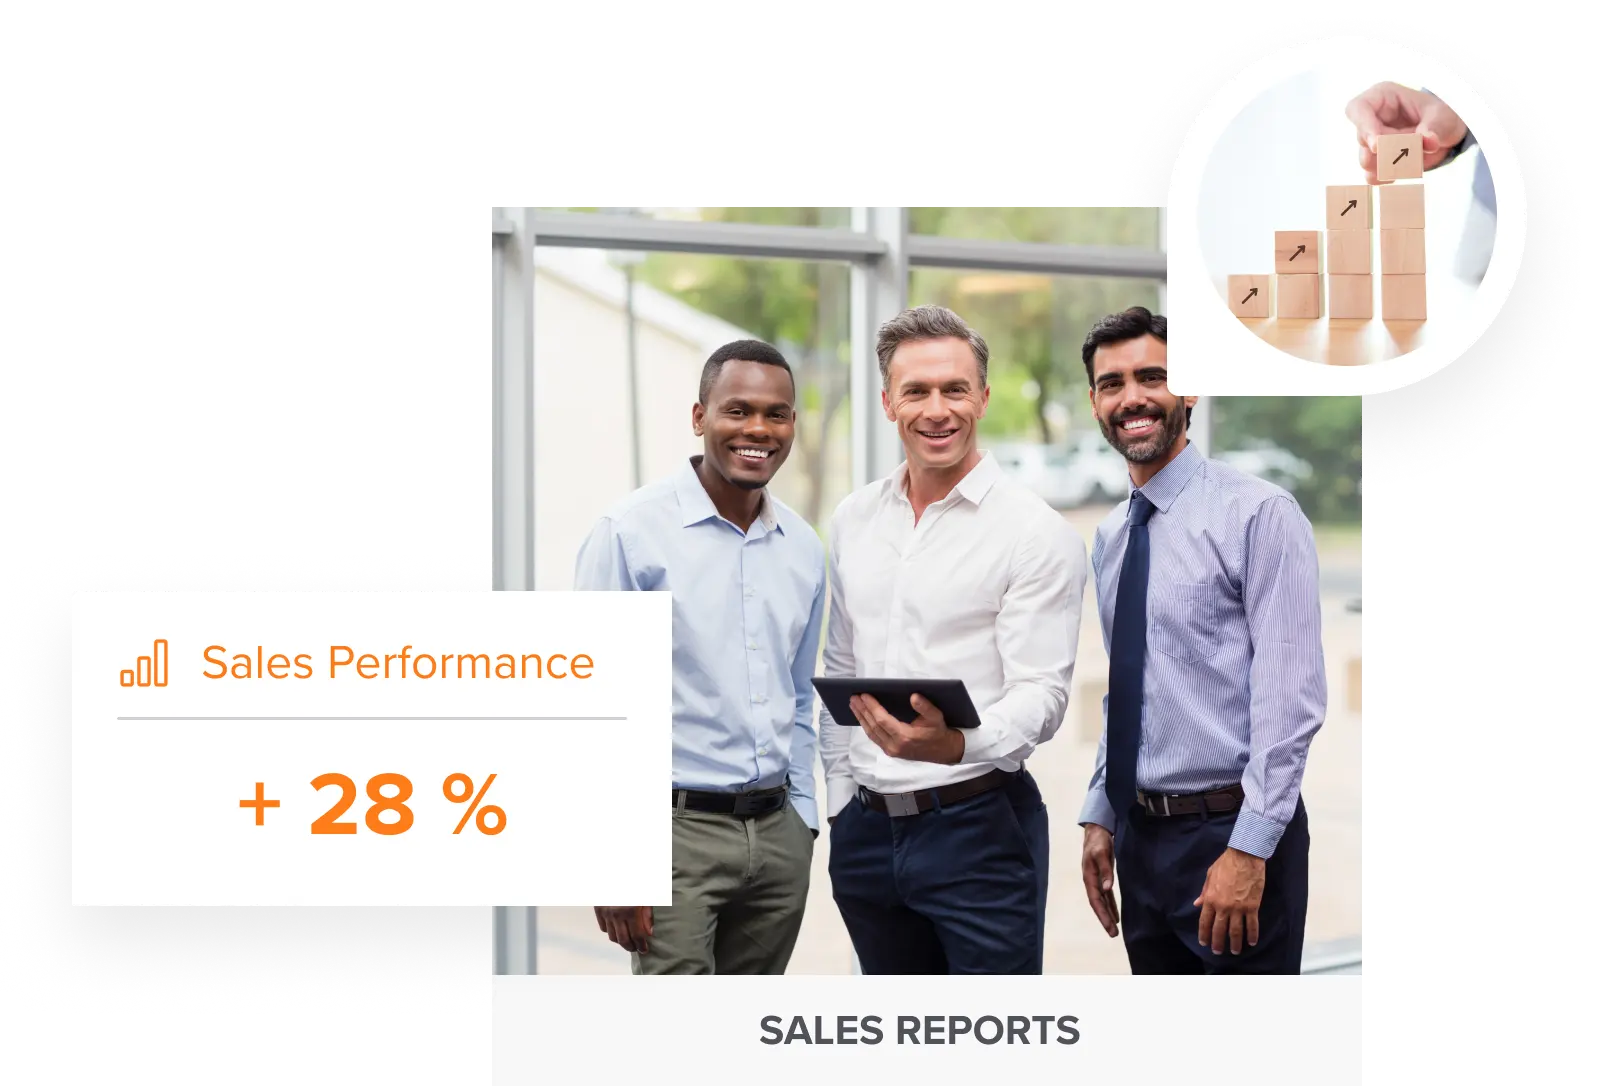 distributo-salesforce-automation-software-sales-performance-sales-reports